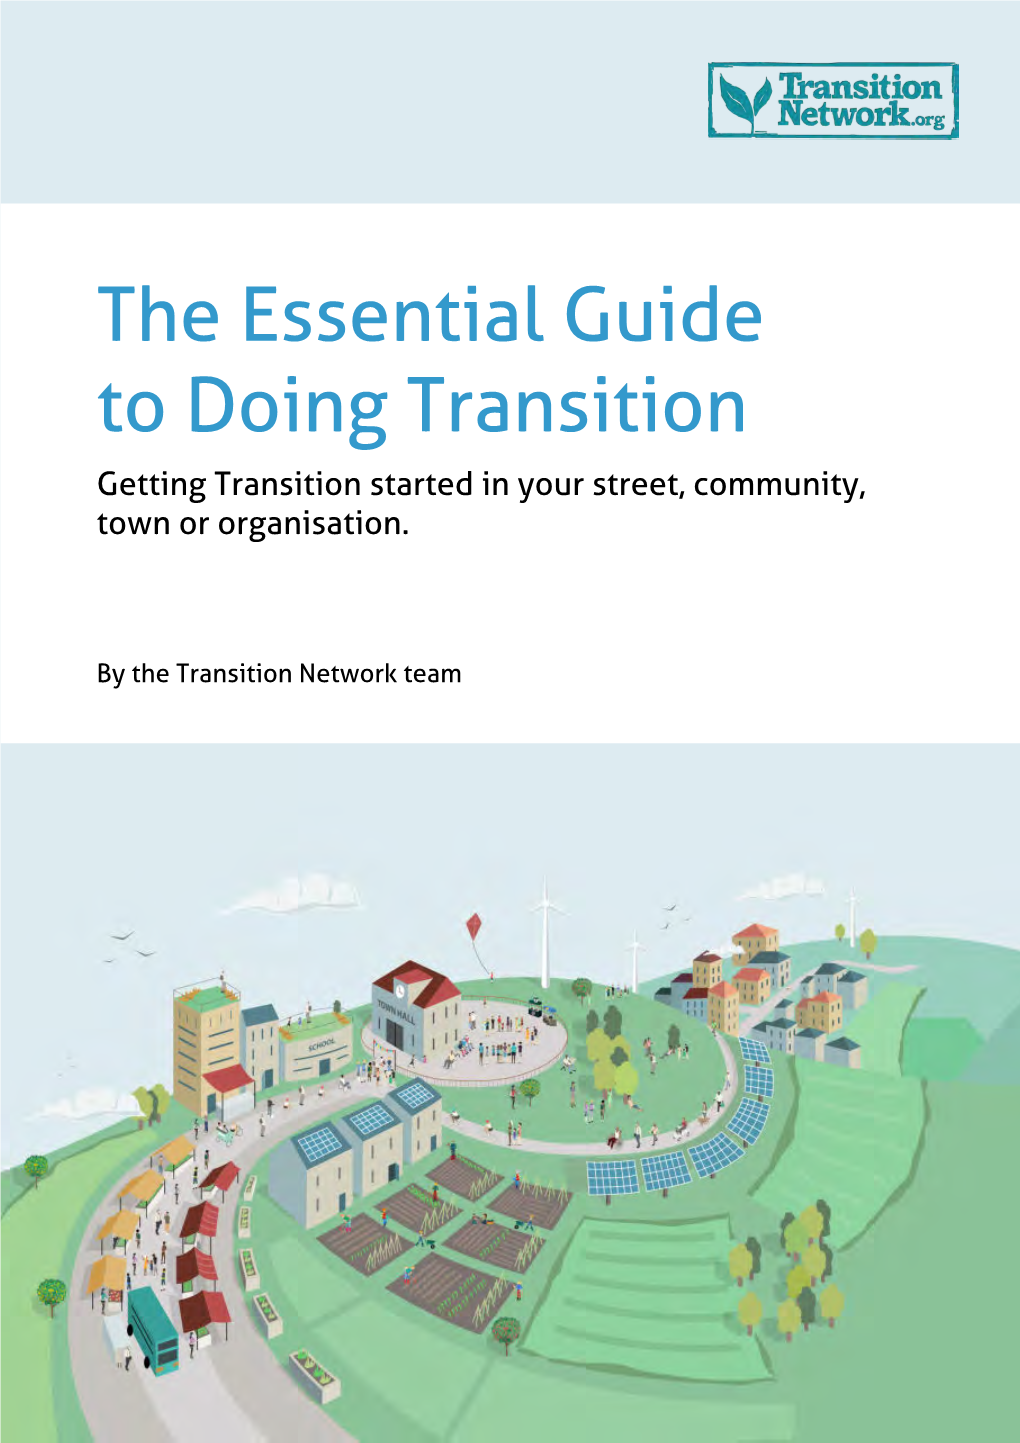 The Essential Guide to Doing Transition